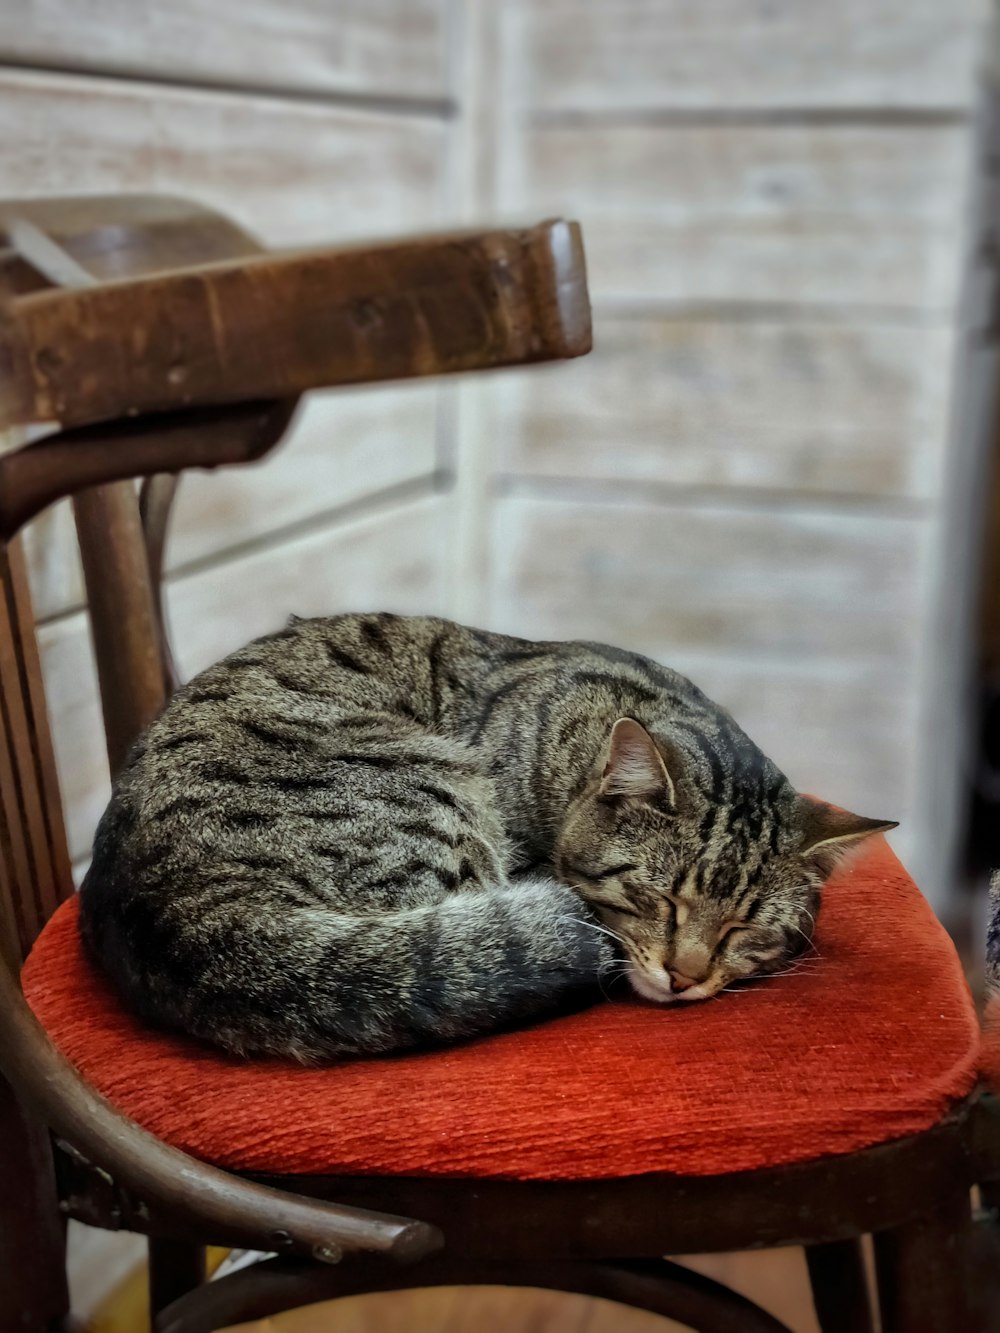 a cat sleeping on top of a red chair